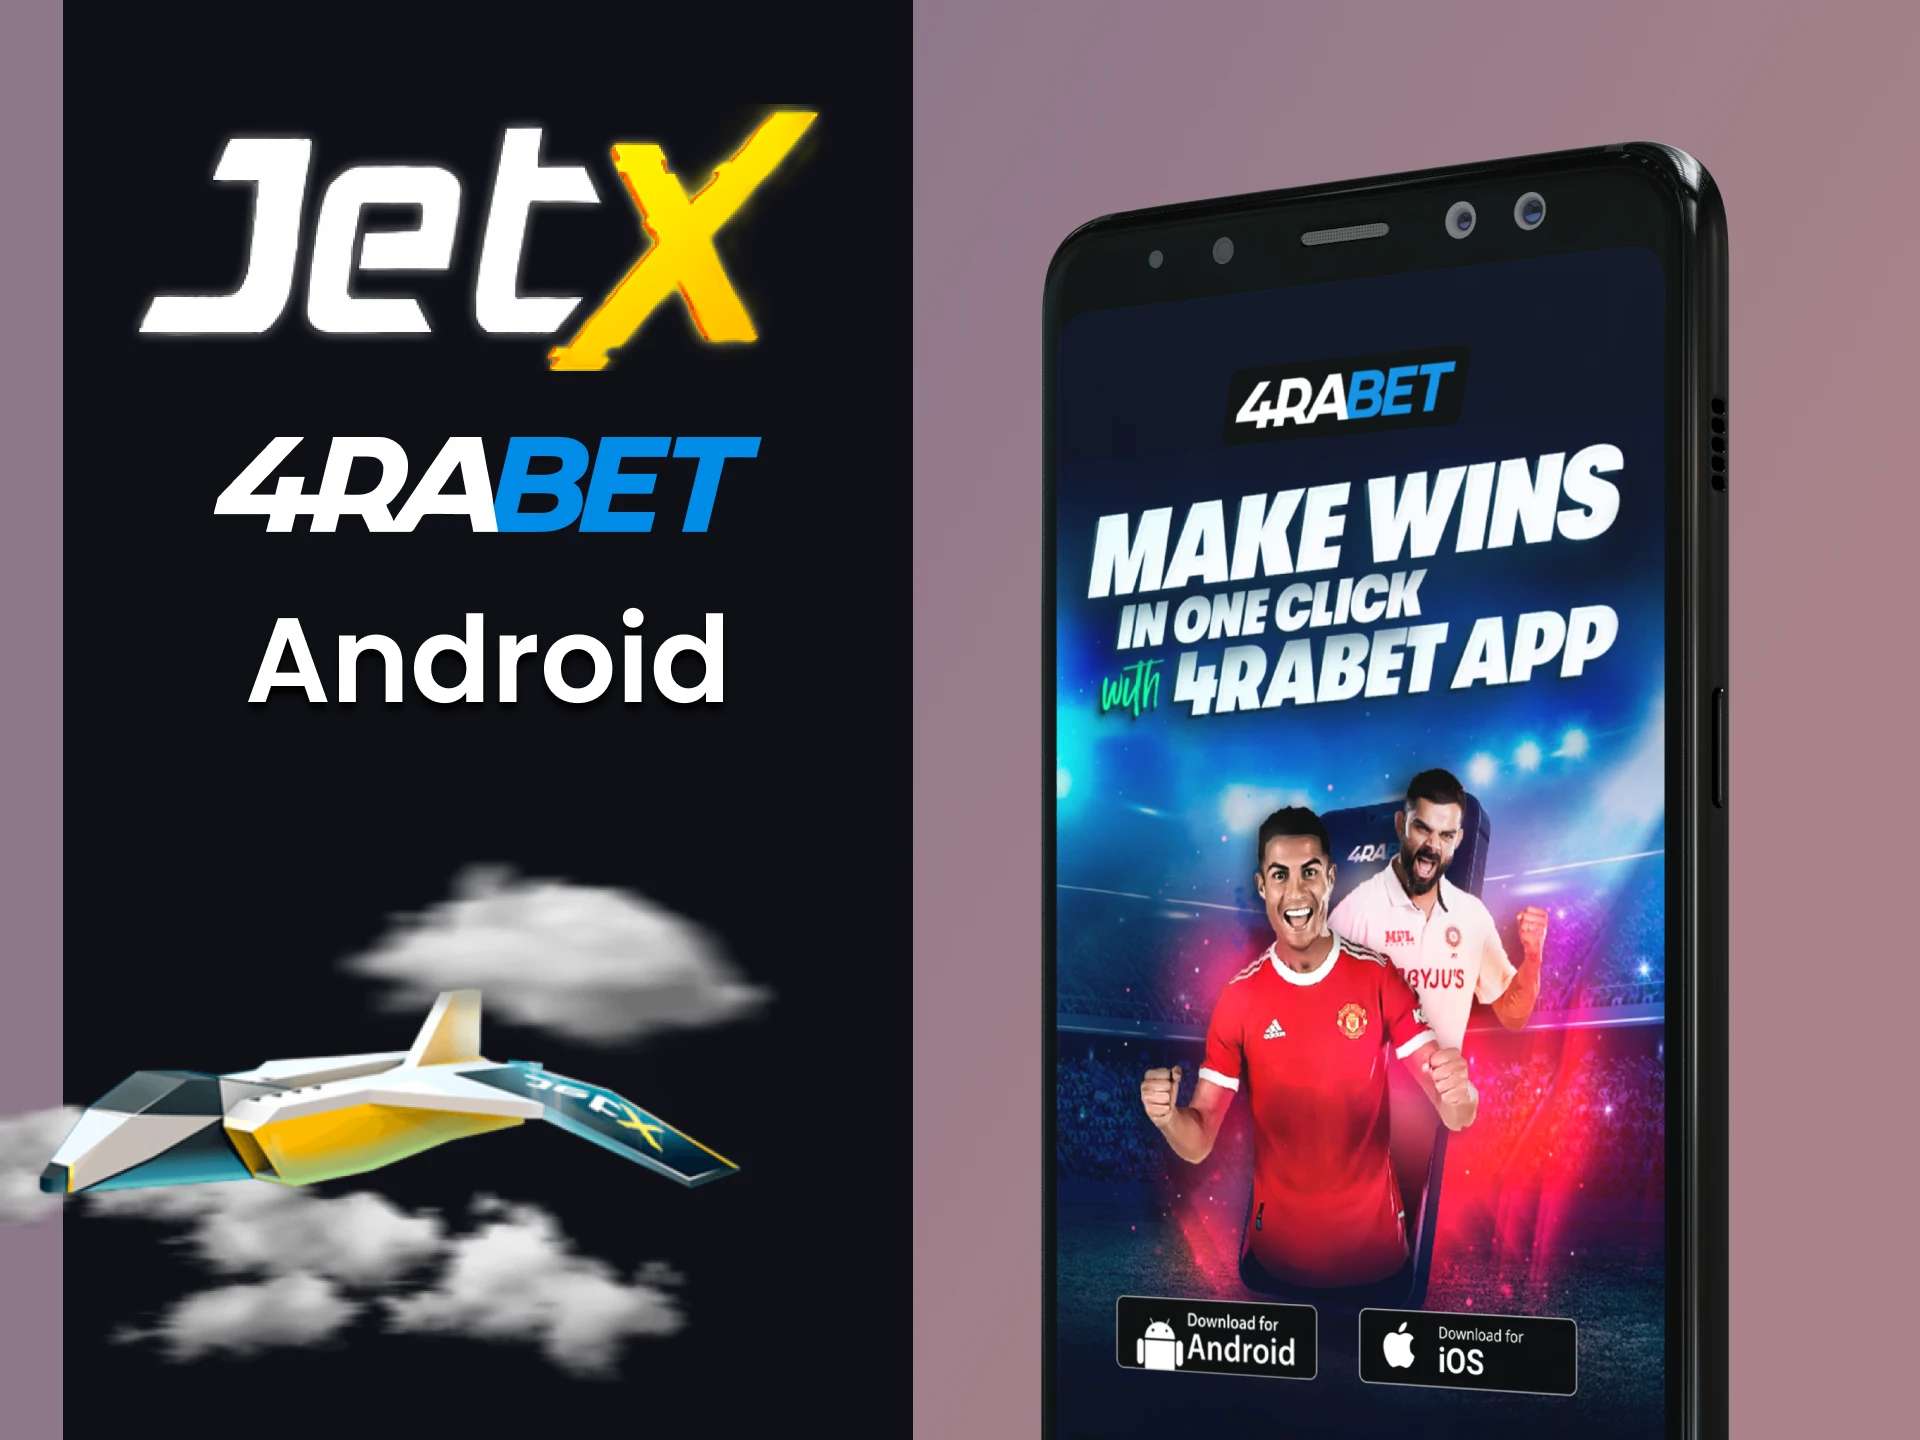 Install the 4rabet app on Android to play JetX.